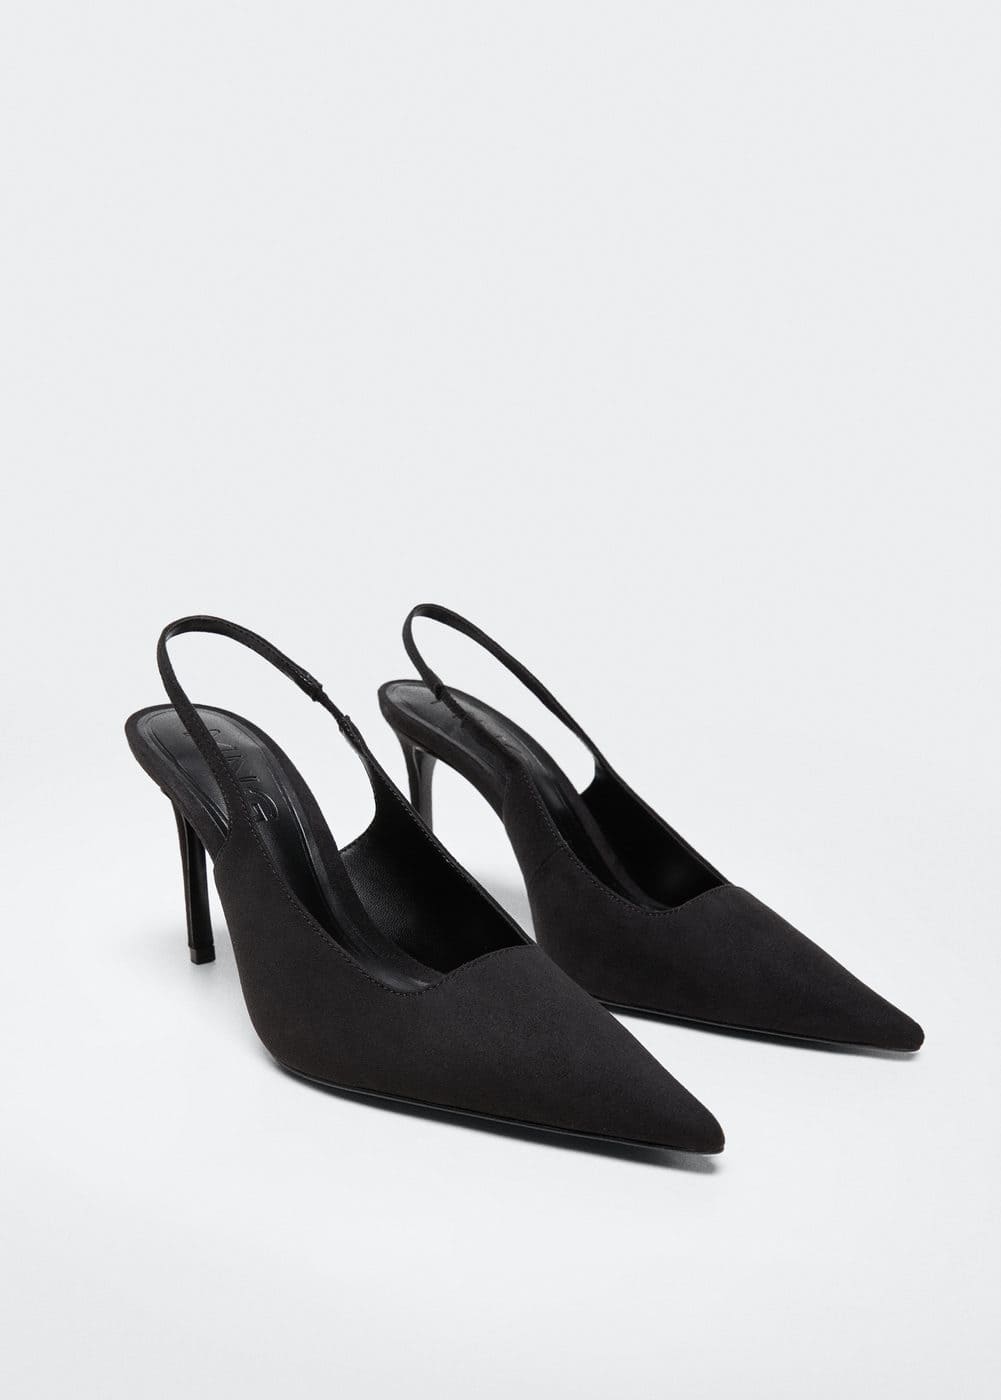 I Can't Believe These Shockingly Pretty Shoes Are From Mango | What Wear